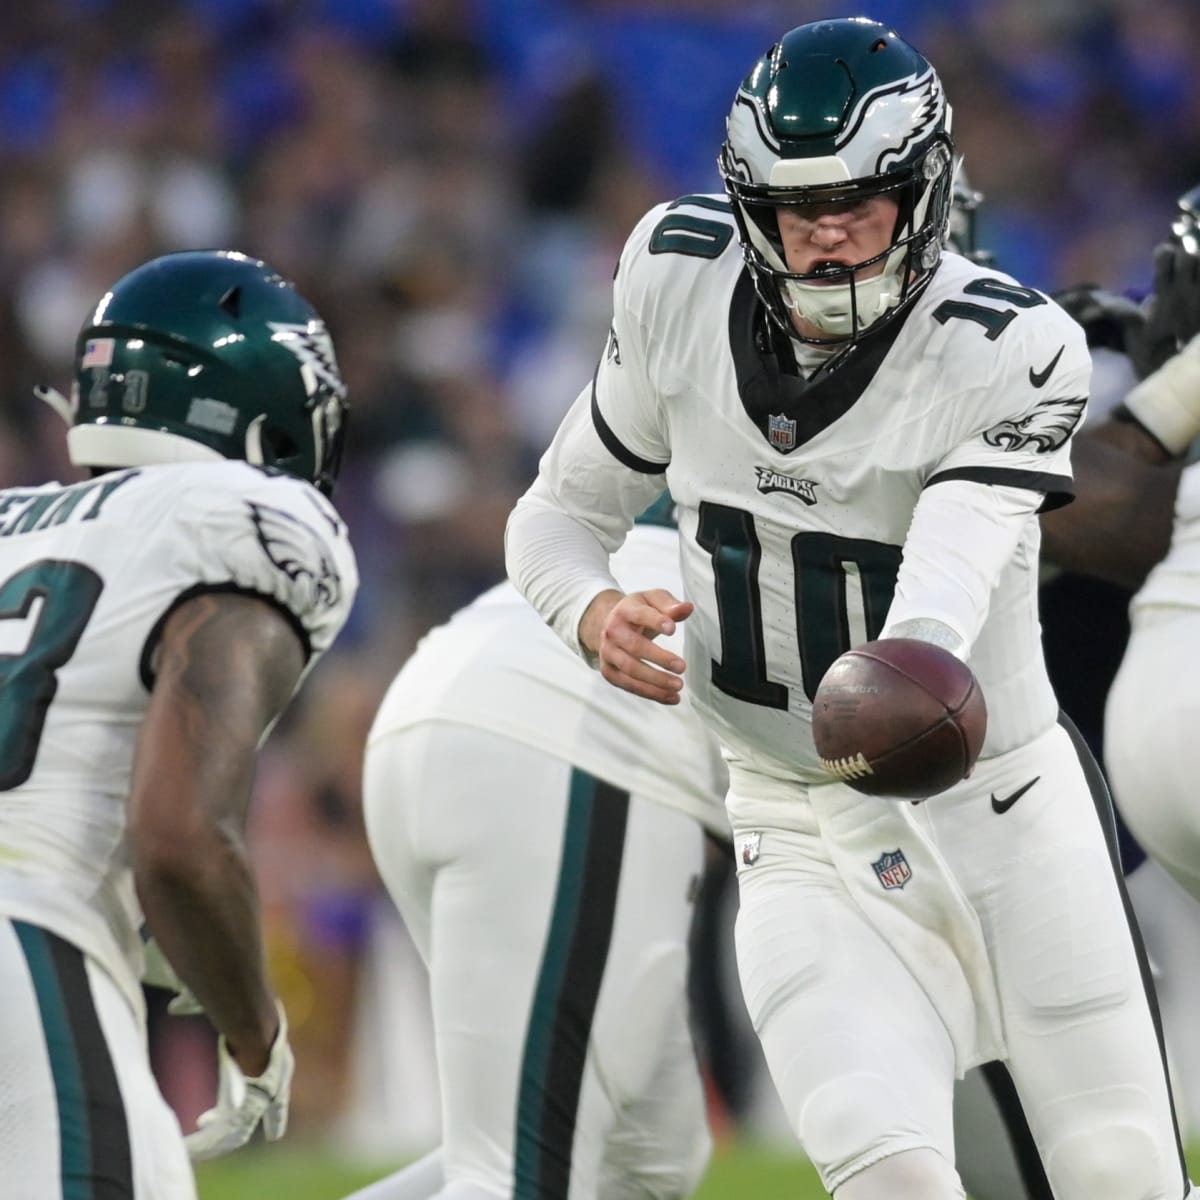 Eagles vs. Ravens: How to watch, listen and stream the preseason opener